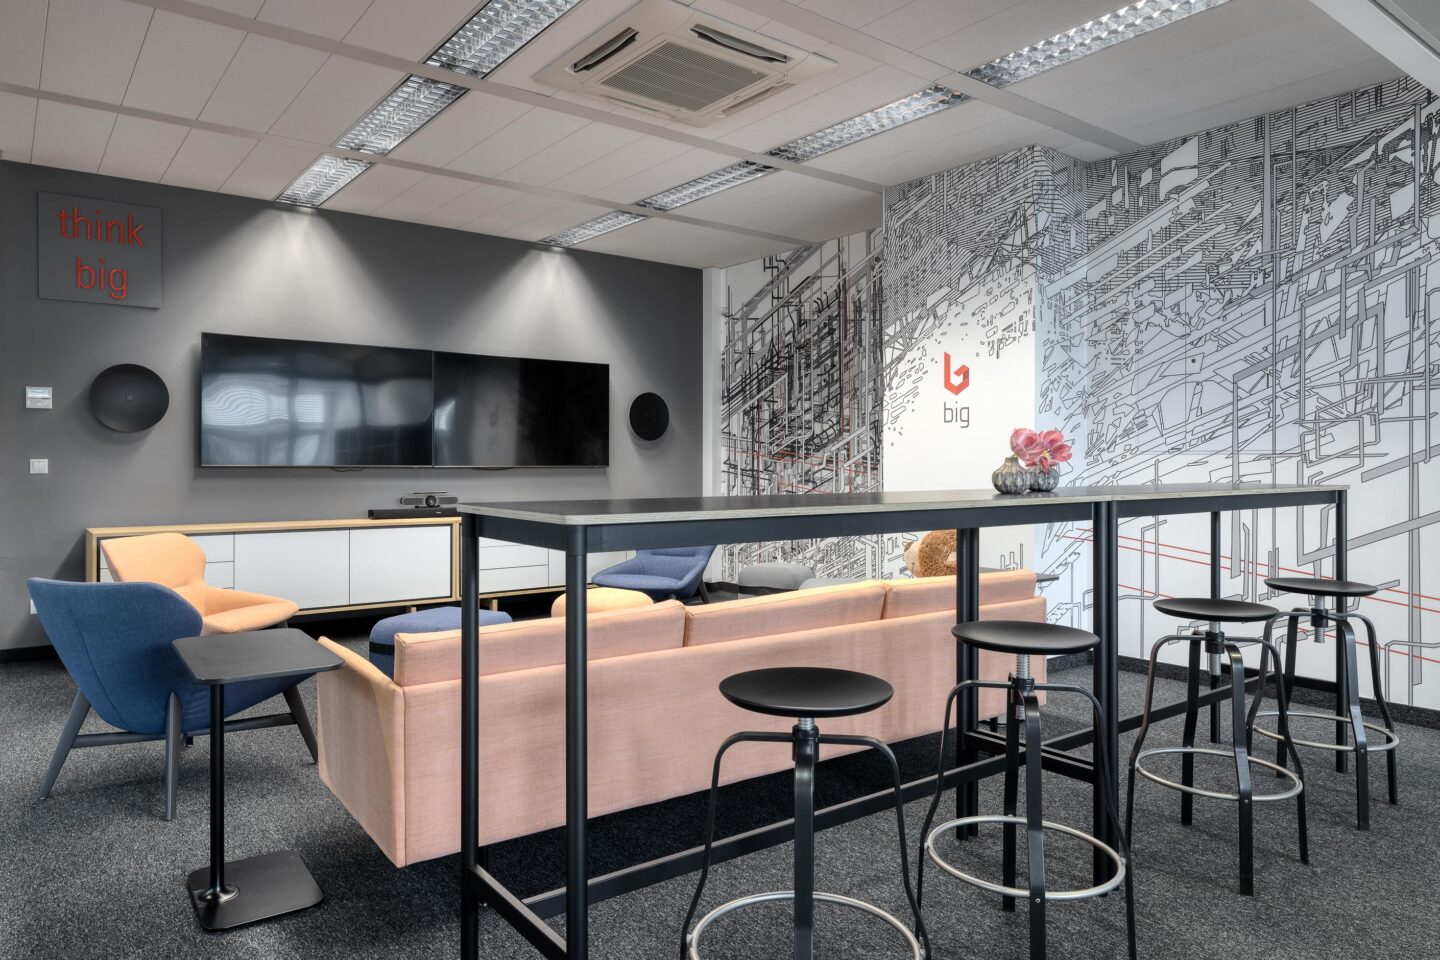 from retreat areas for concentrated work to open communication areas with lounge furniture to multifunctional meeting and creative rooms with flexible furniture and digital equipment